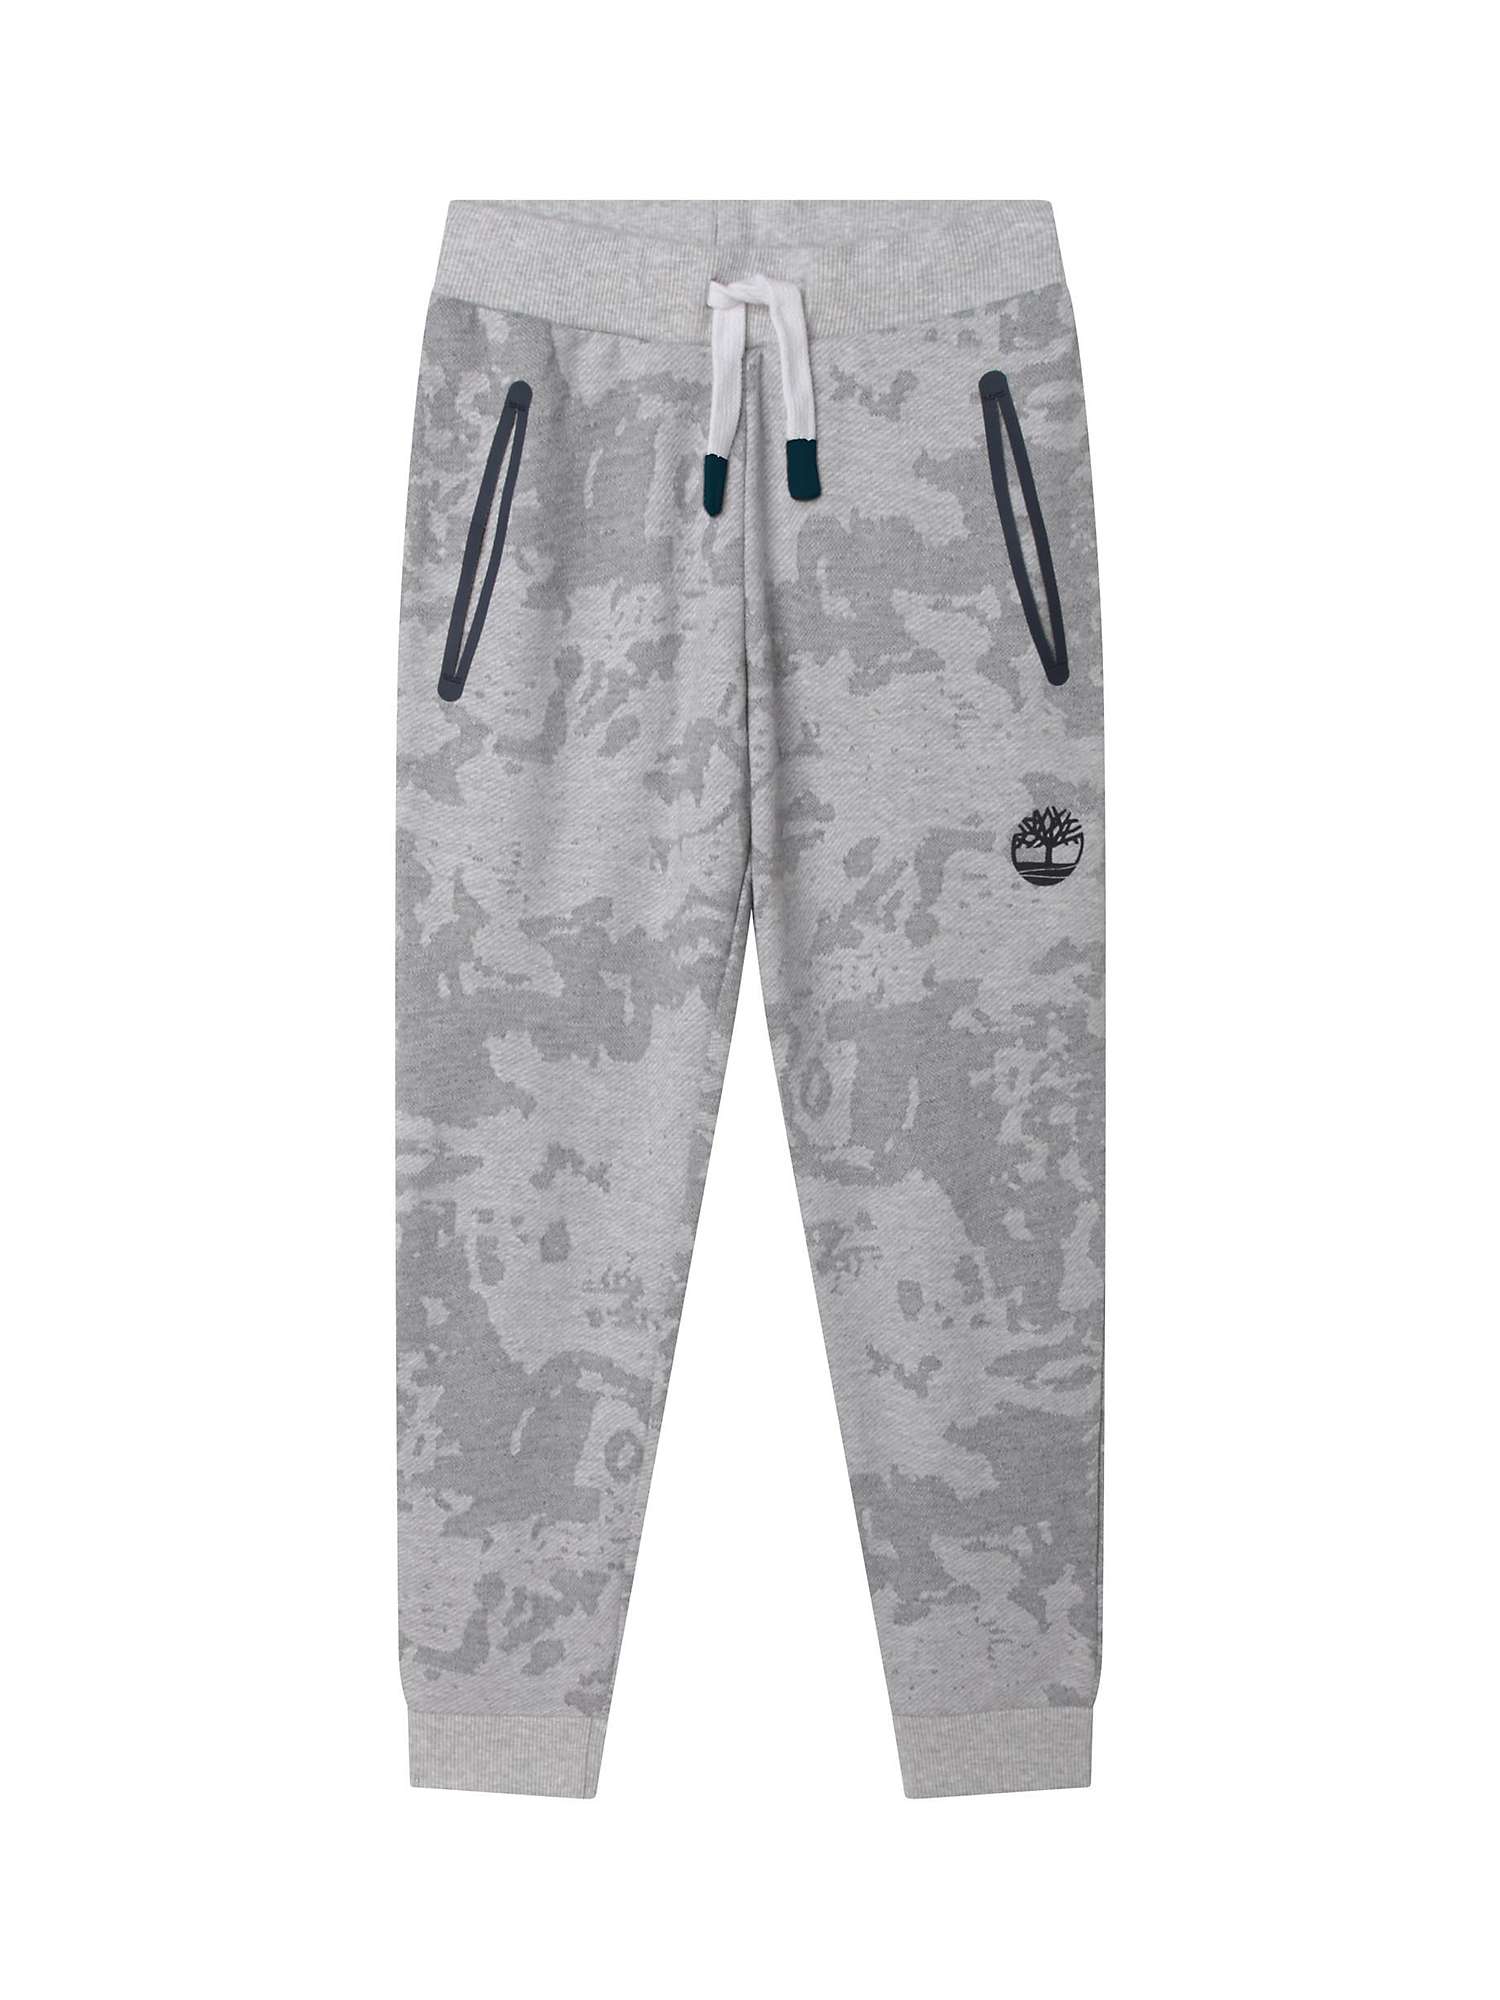 Buy Timberland Kids' Camouflage Joggers, Light Grey Online at johnlewis.com